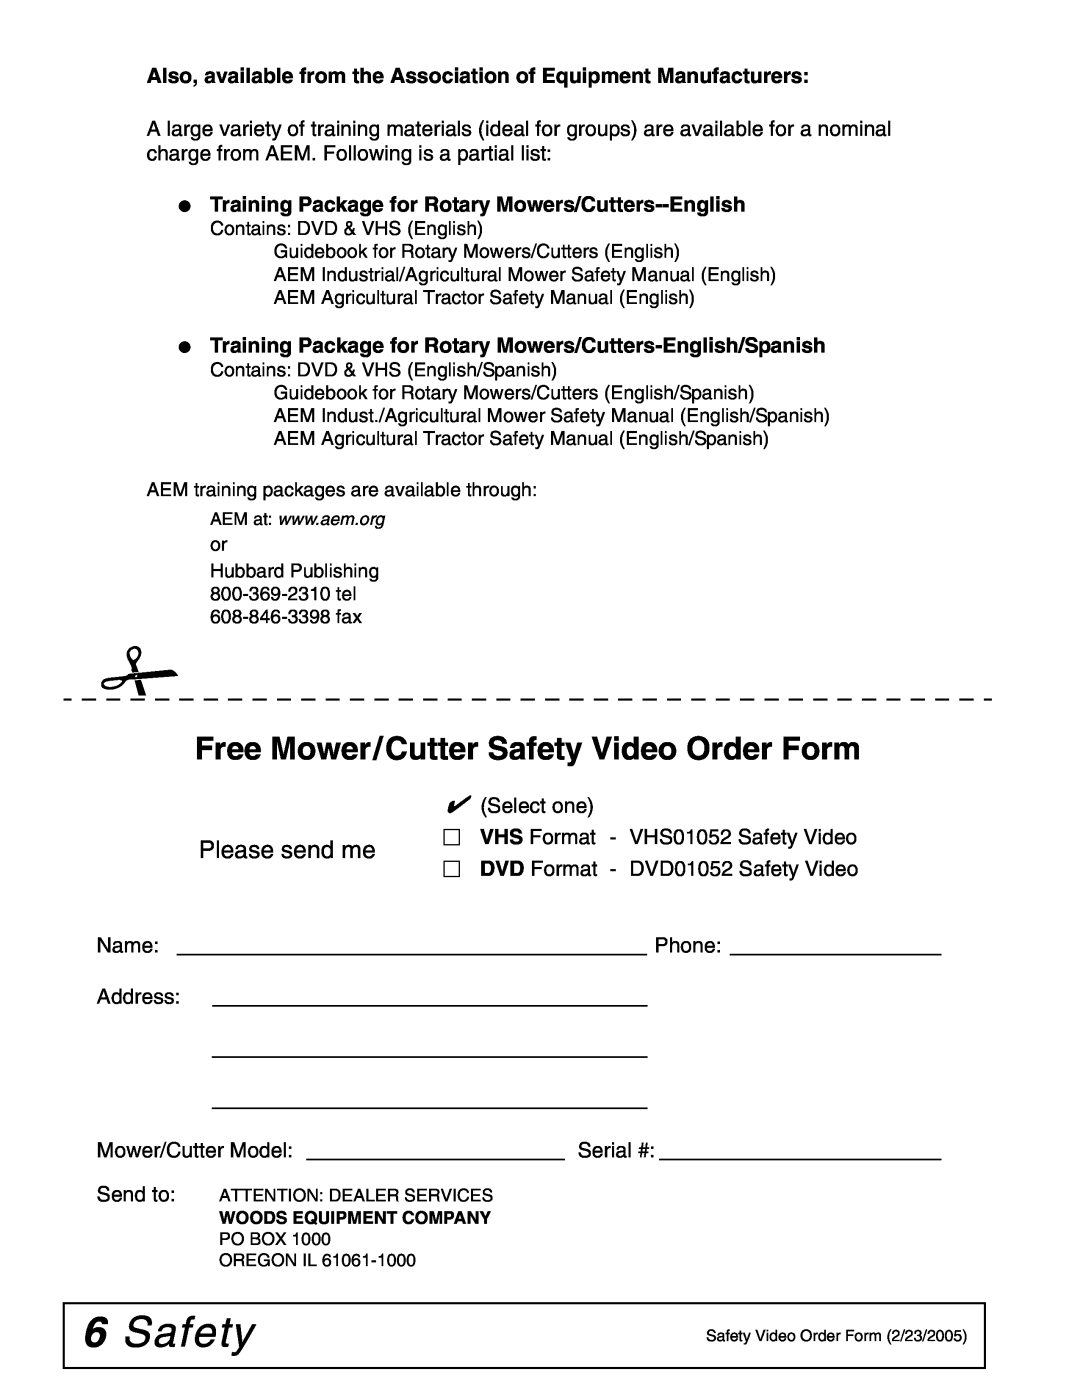 Woods Equipment MD80-2 manual 6Safety, Free Mower/Cutter Safety Video Order Form, Please send me 